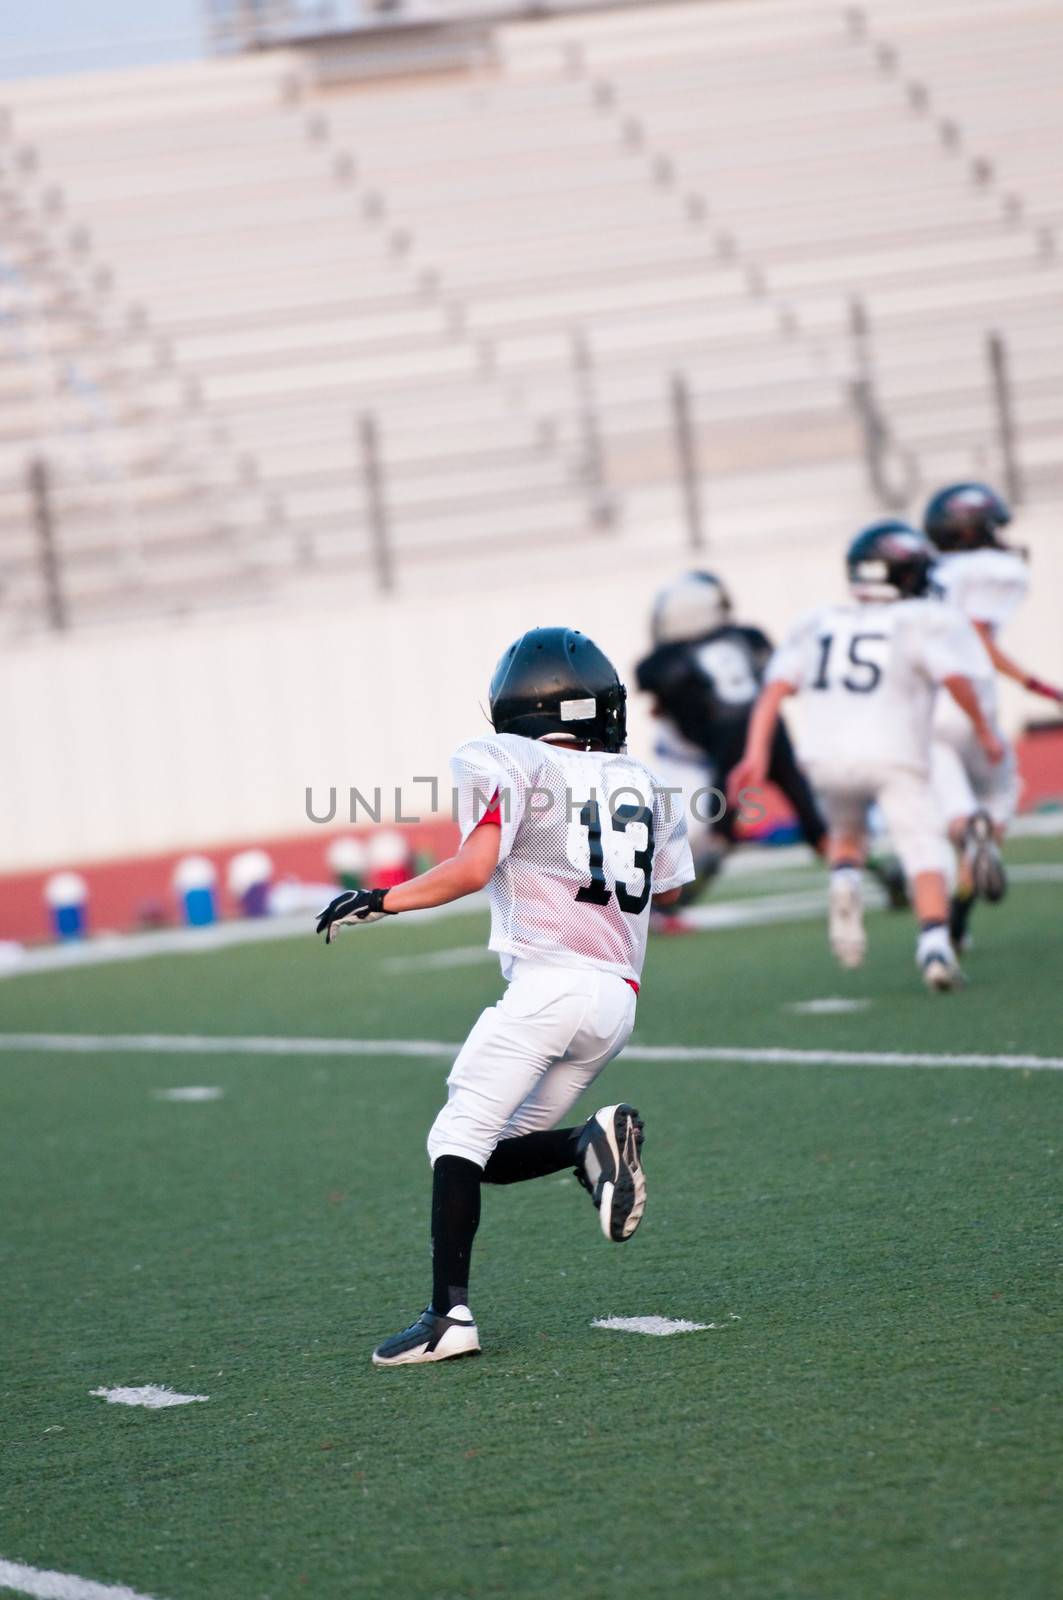 Youth football player as wide receiver going out for a pass.